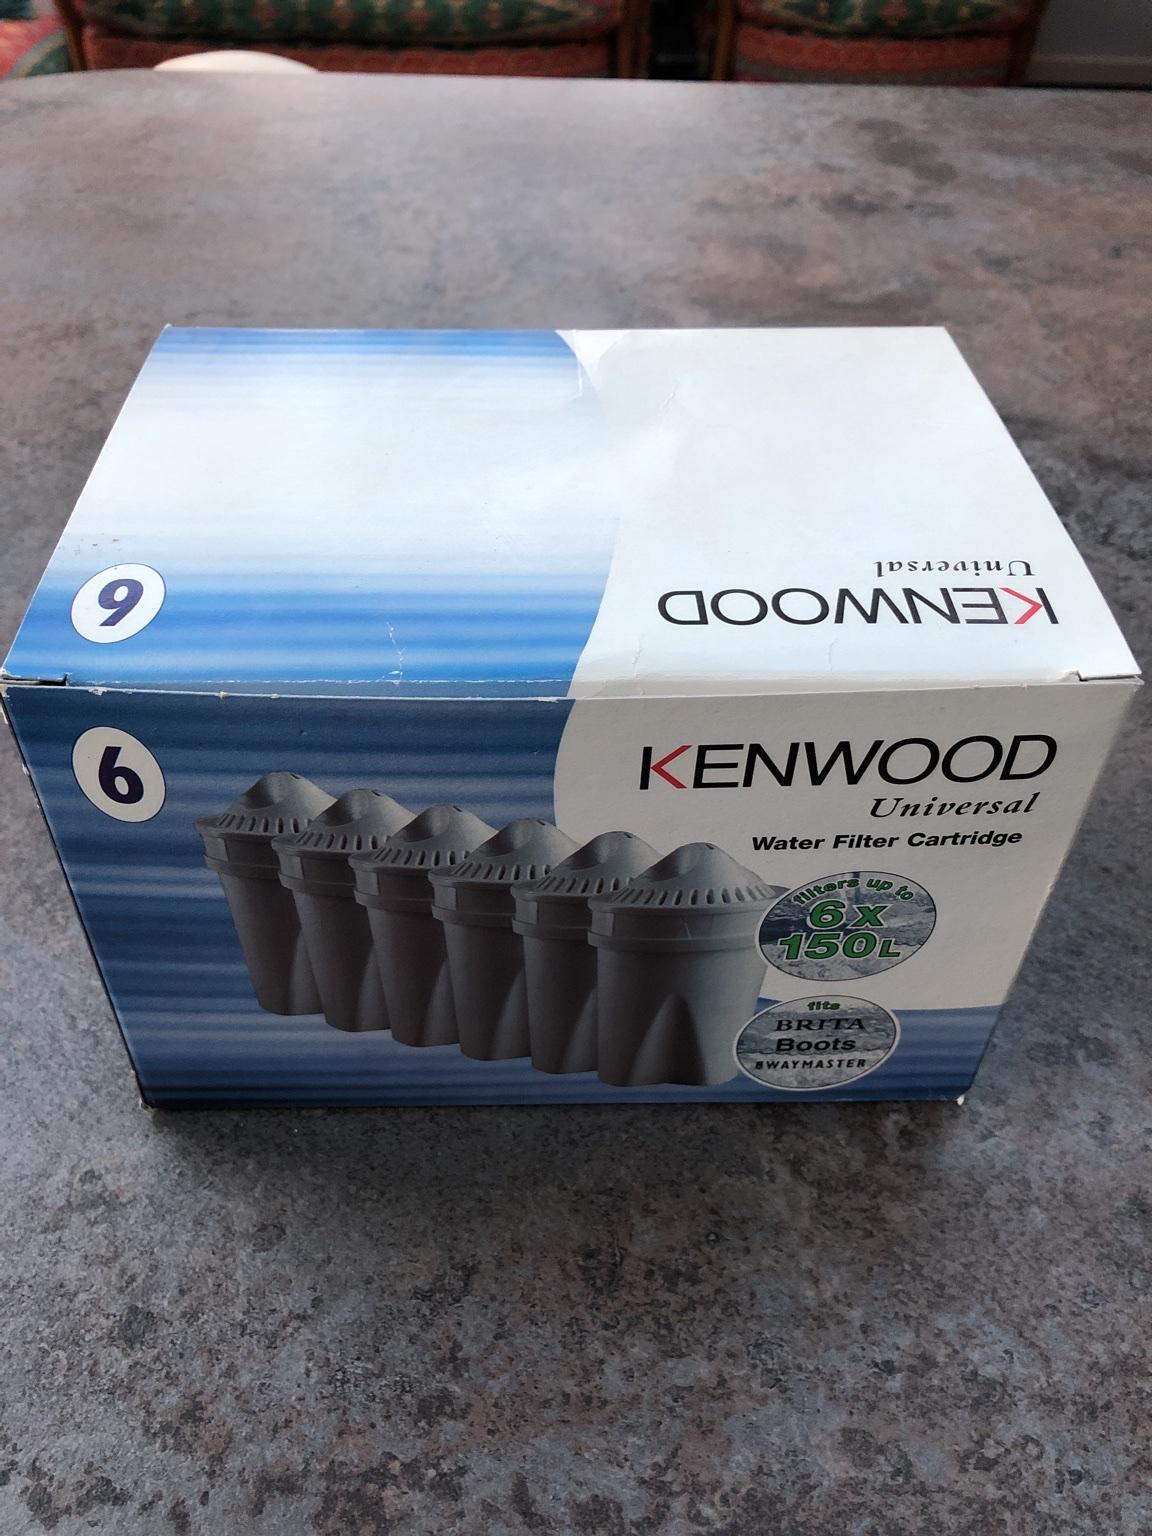 KENWOOD Universal Water Filter Cartridges in B91 Solihull for £1.00 for sale Shpock